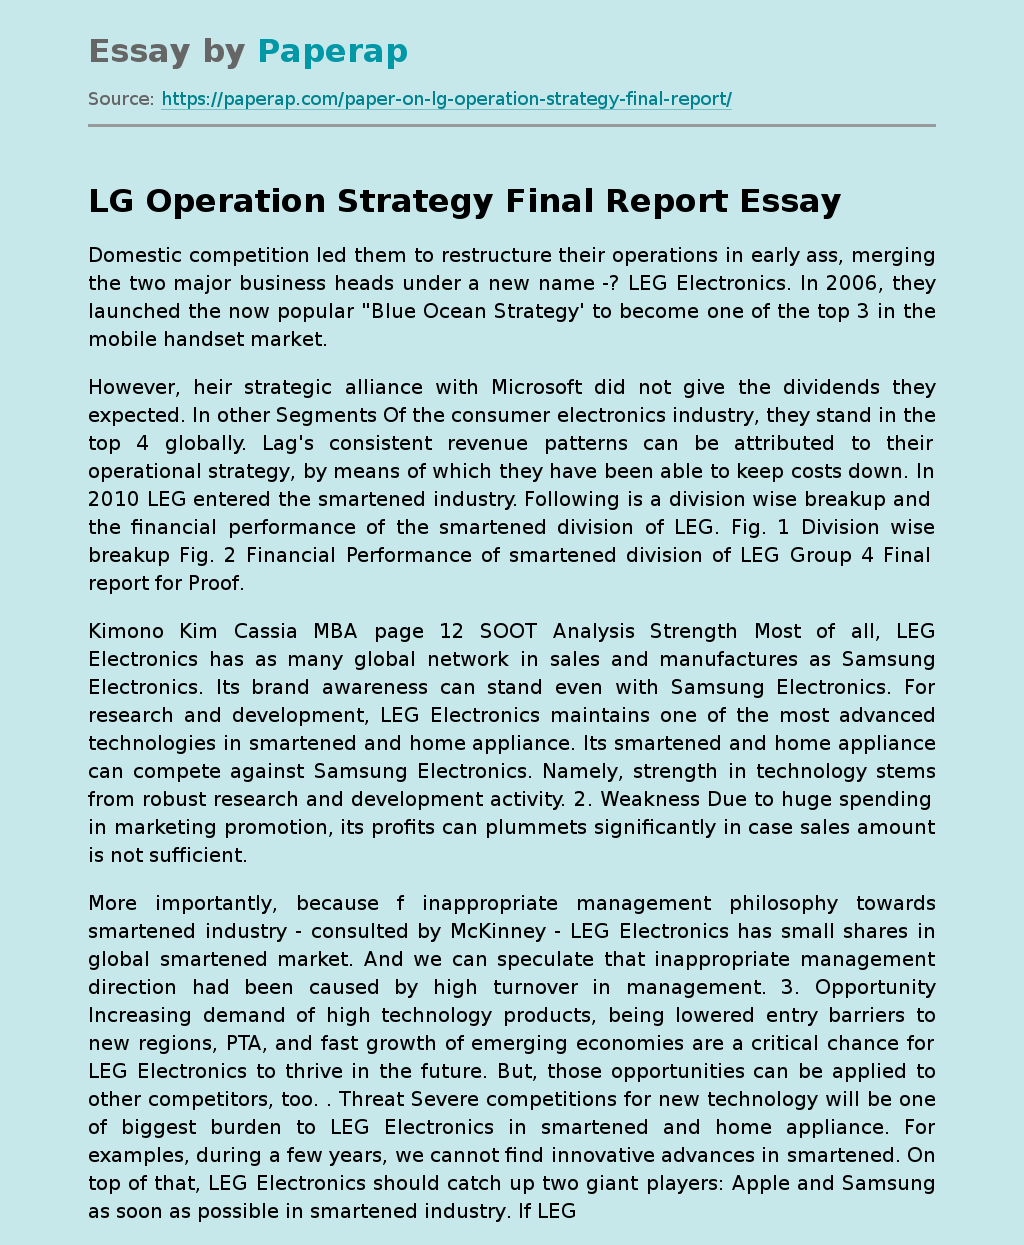 LG Operation Strategy Final Report